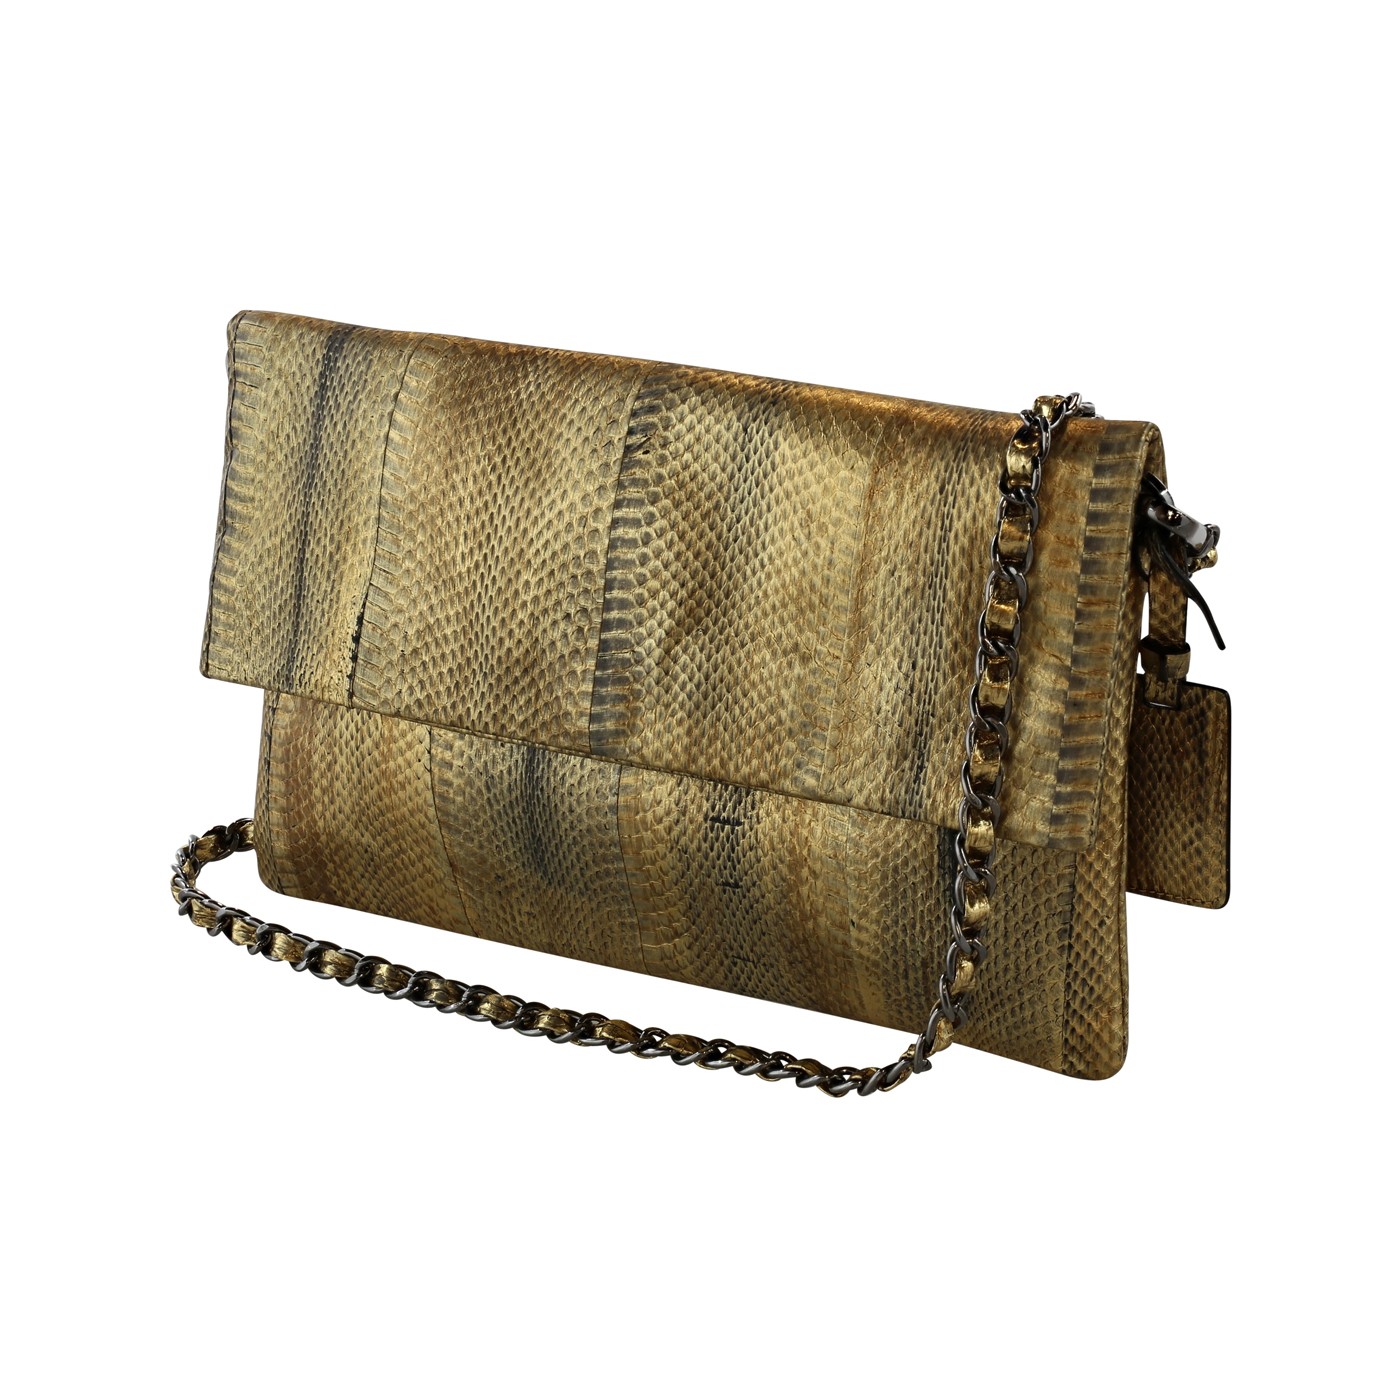 Leather Clutch Bag with detachable long chain strap